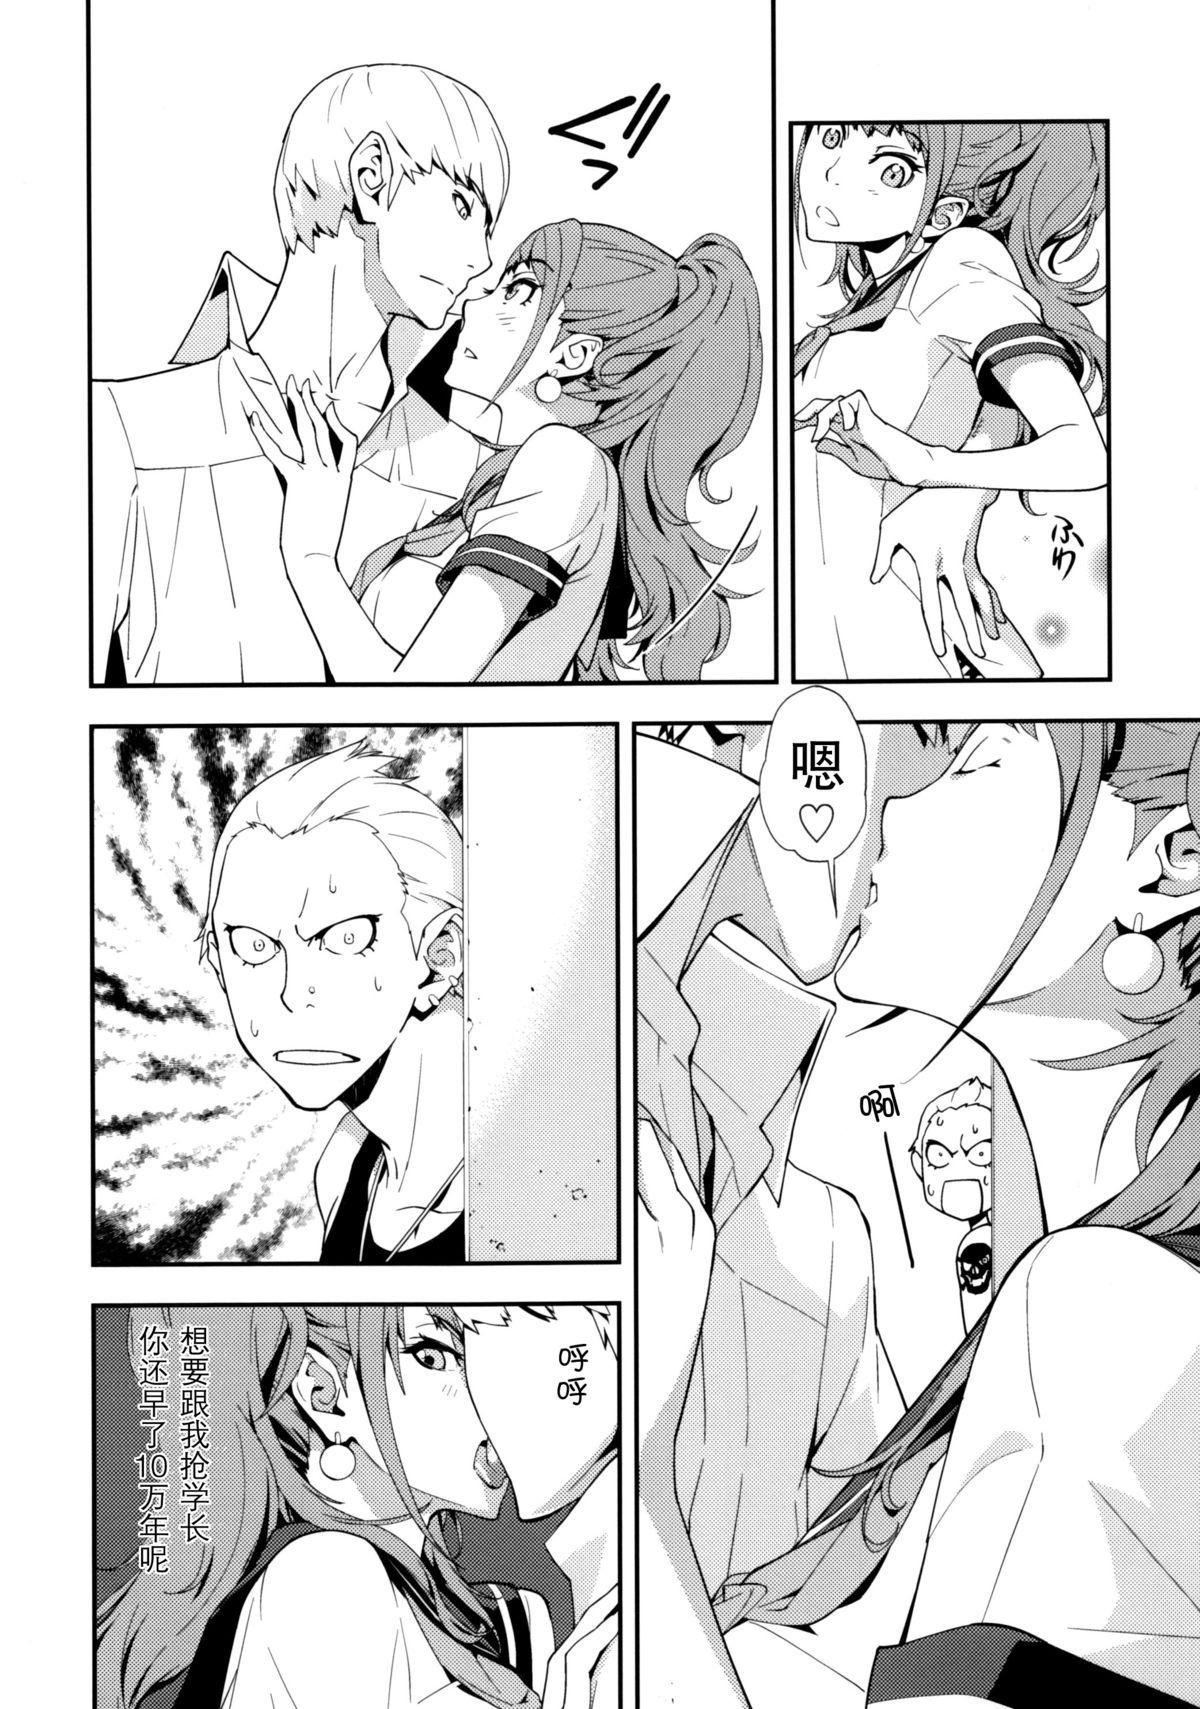 Adolescente Rise Sexualis 2 - Persona 4 Stunning - Page 10